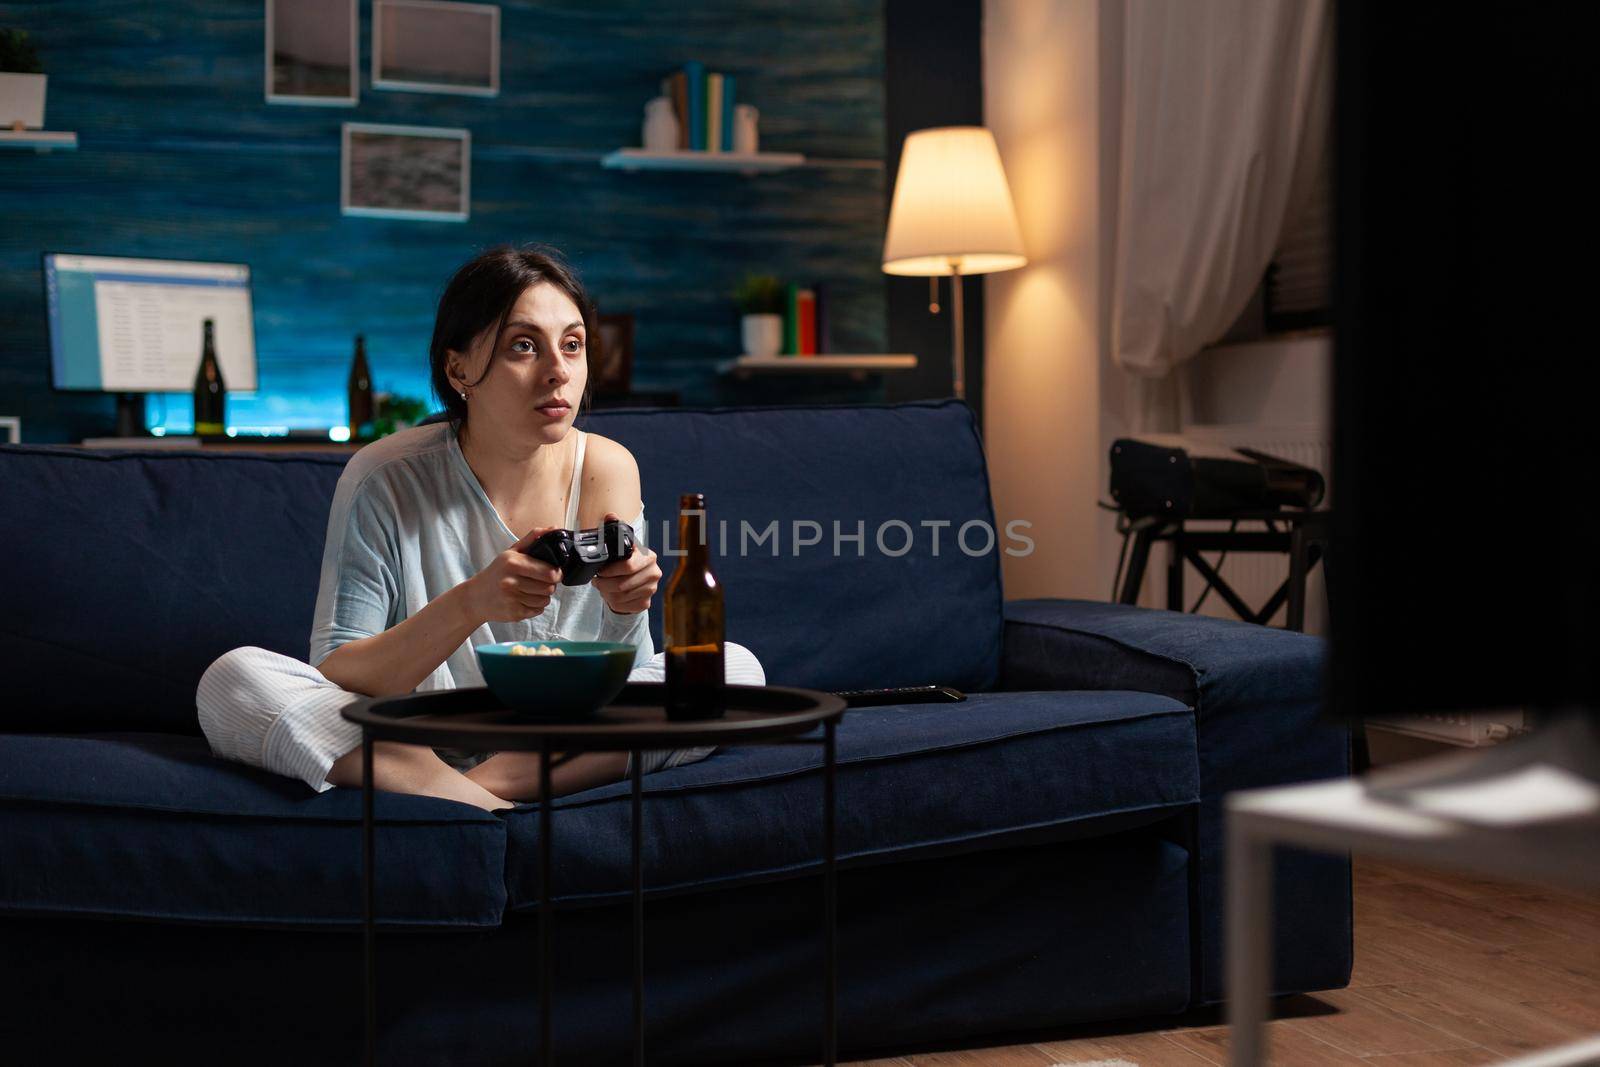 Focused defeat gamer playing video games on tv late night trying to win online soccer competition using gaming joystick. Involved serious woman sitting on couch relaxing in living room